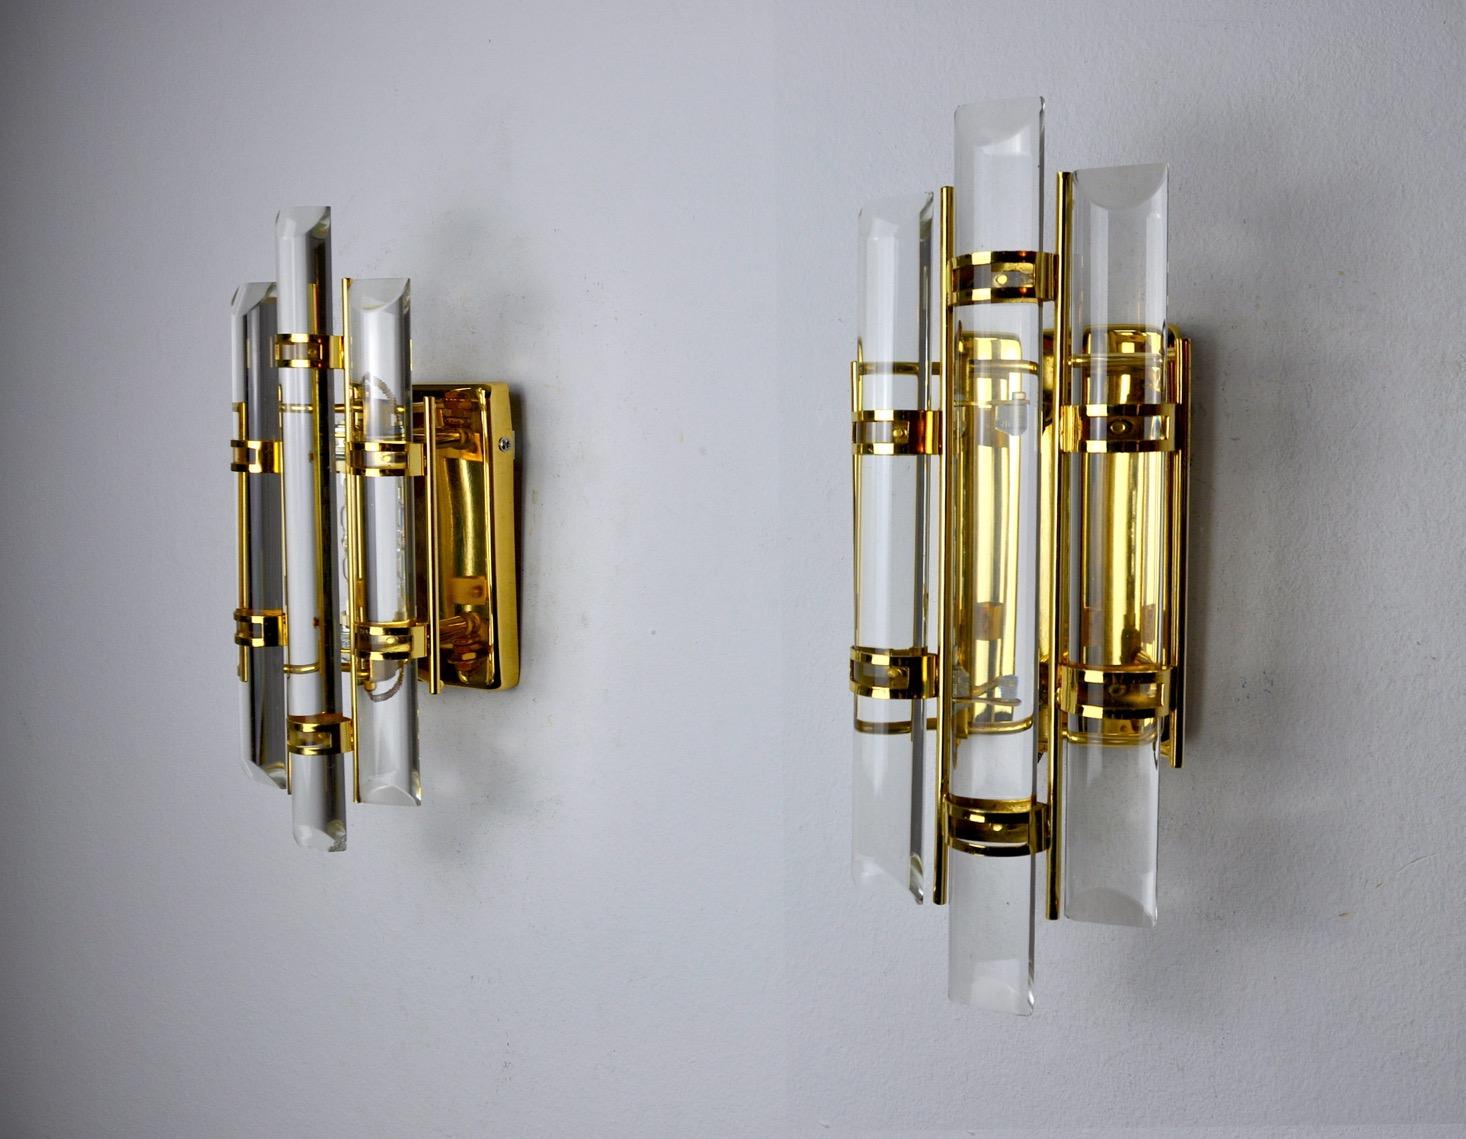 Very nice pair of venini wall lights produced in italy in the 70s. Cut glass and gilt metal structure. Unique object that will illuminate wonderfully and bring a real design touch to your interior. Electricity checked, mark of time consistent with